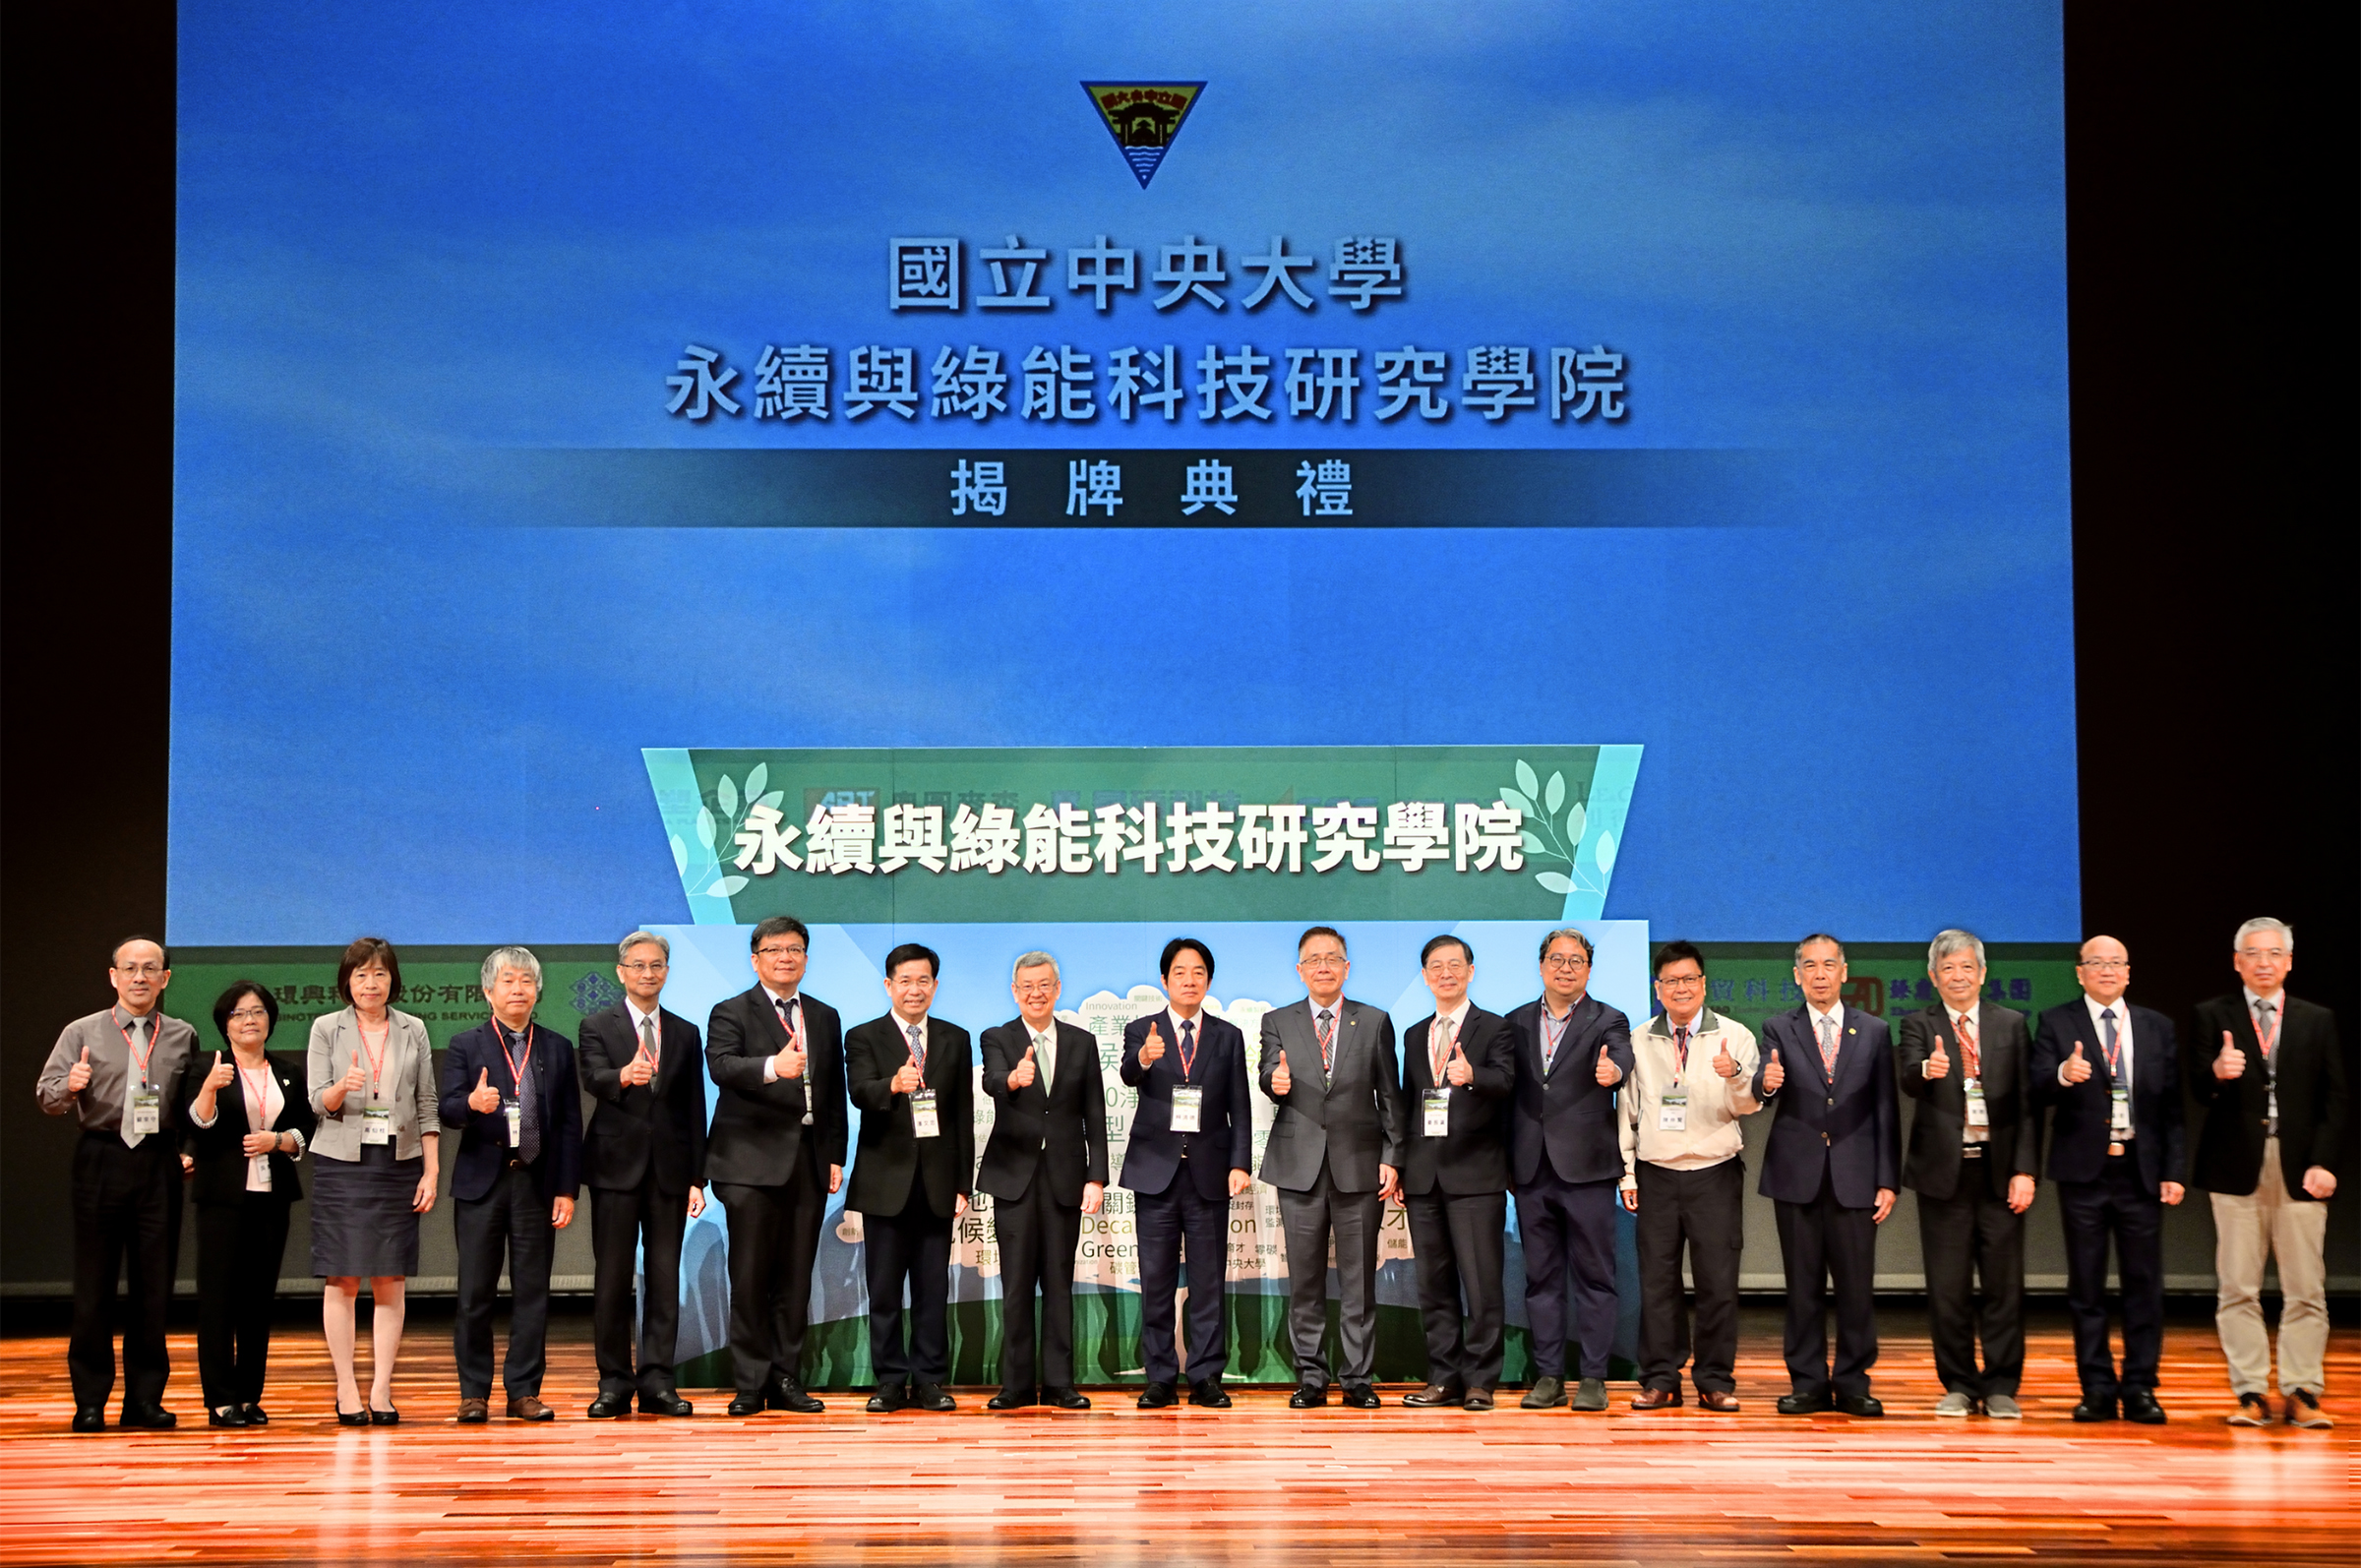 Unveiling Ceremony Held for NCU's Graduate College of Sustainability and Green Energy (SAGE)—First of Its Kind in Taiwan